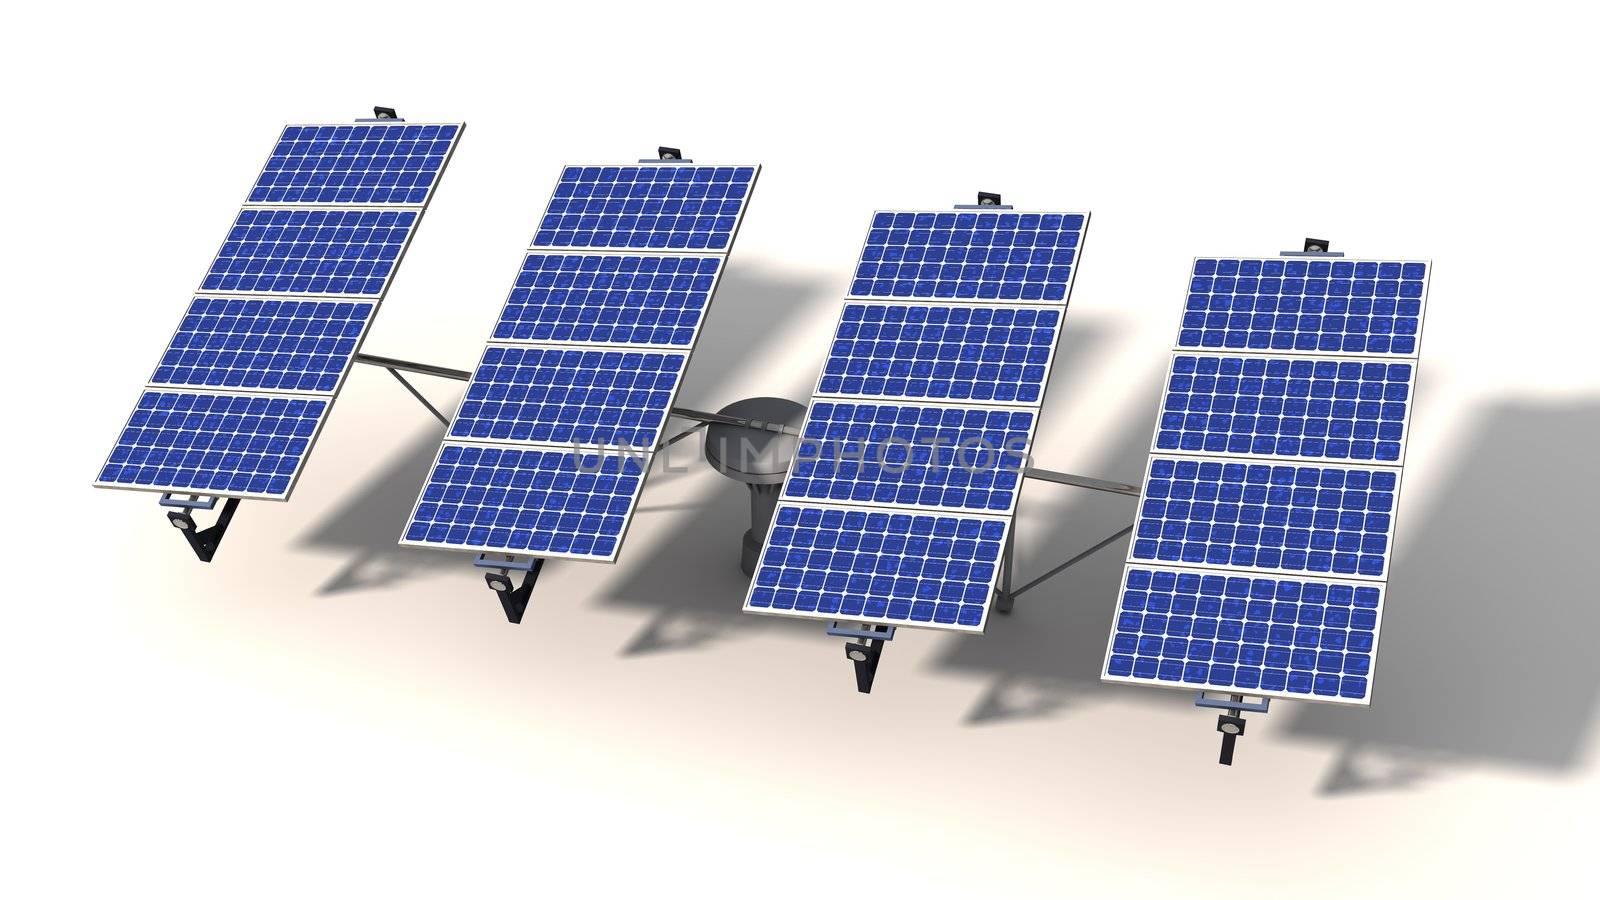 One articulated solar panel module in morning by shkyo30